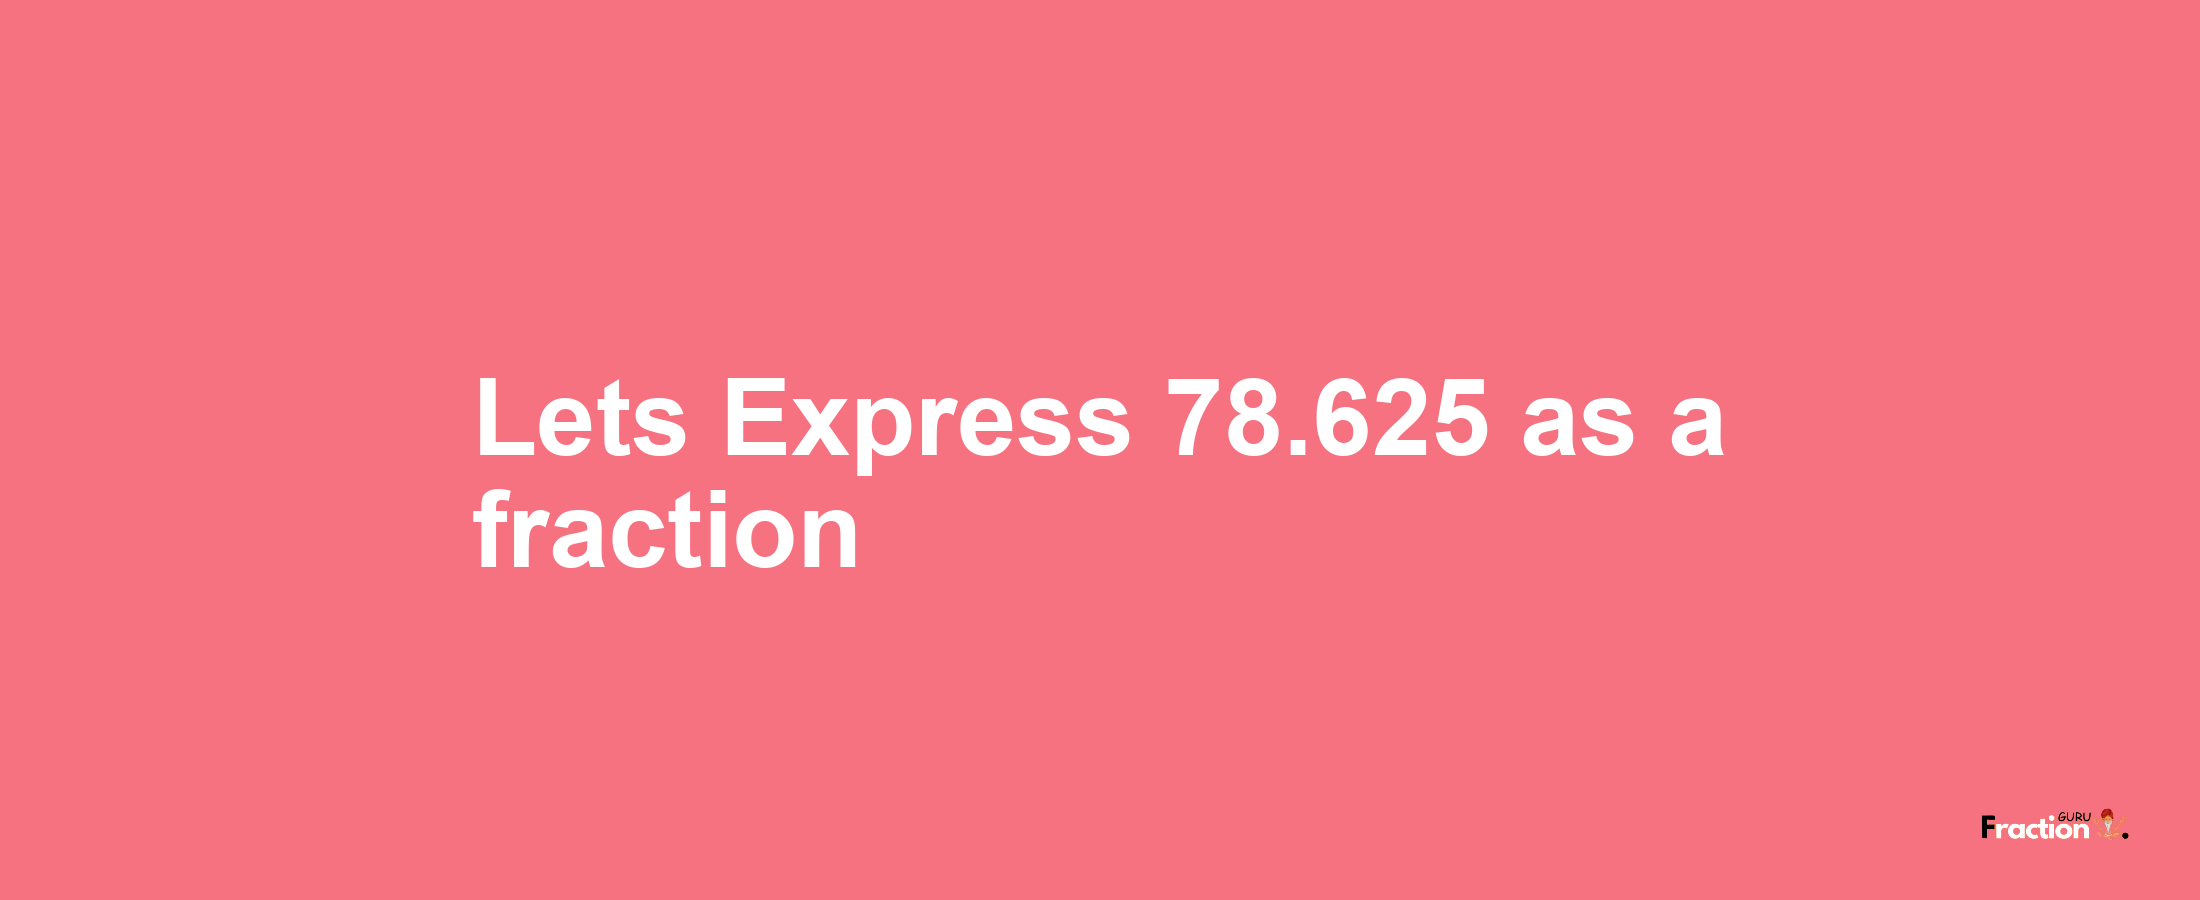 Lets Express 78.625 as afraction